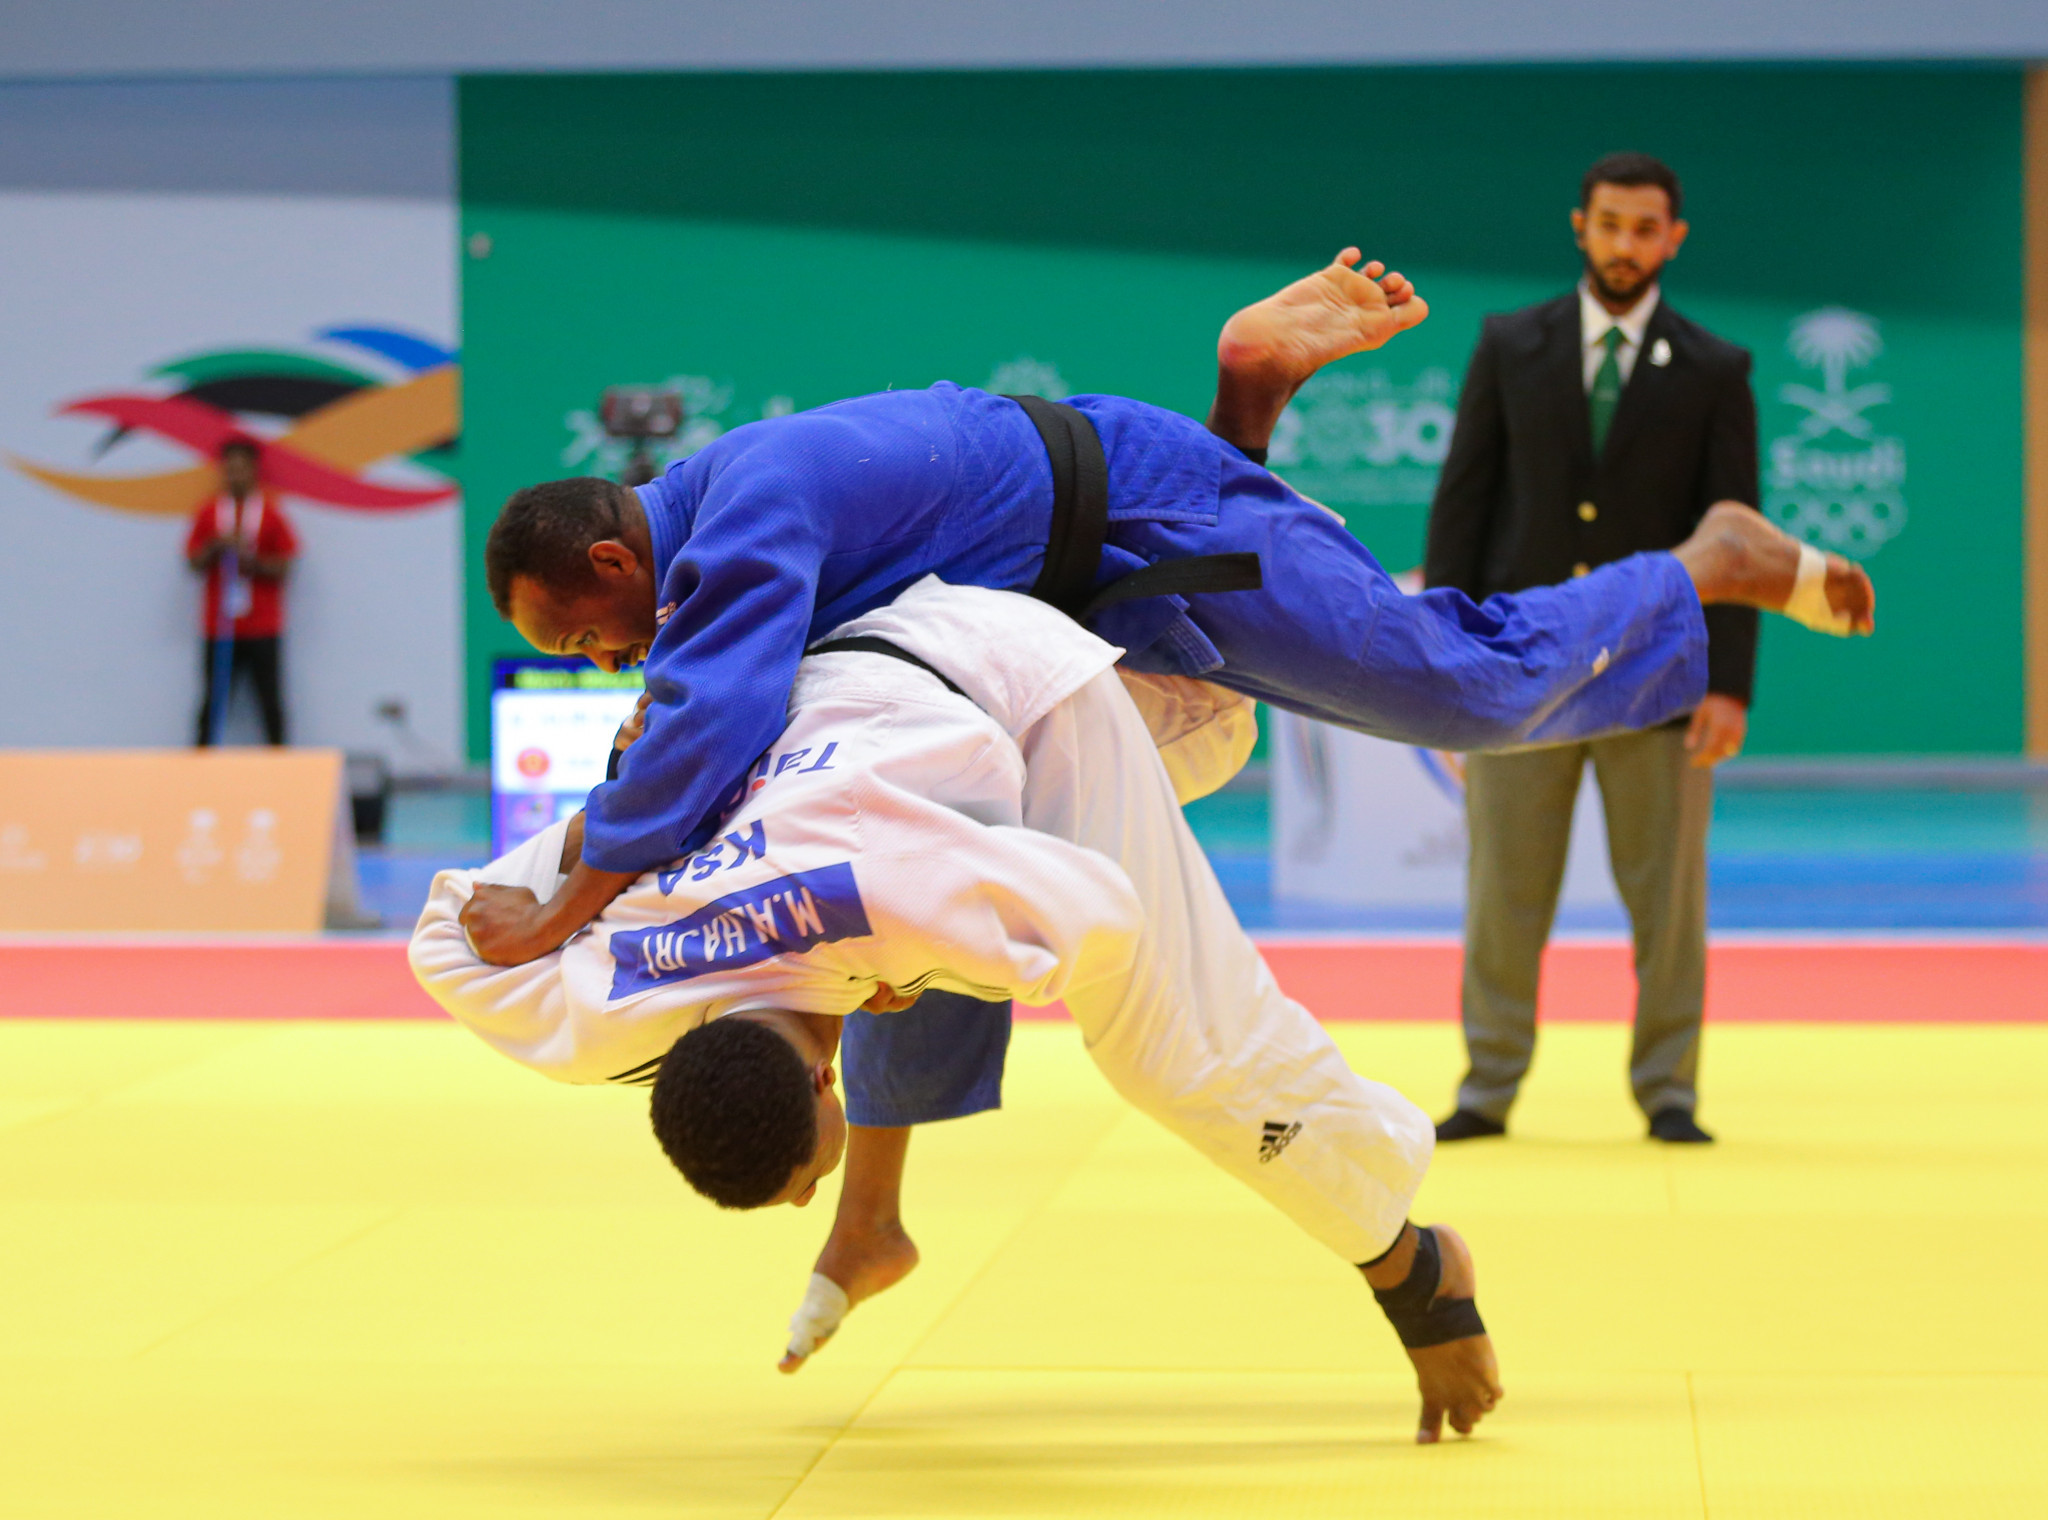 Judokas contested fiercely for medals at the King Saud University Arena ©Saudi Games